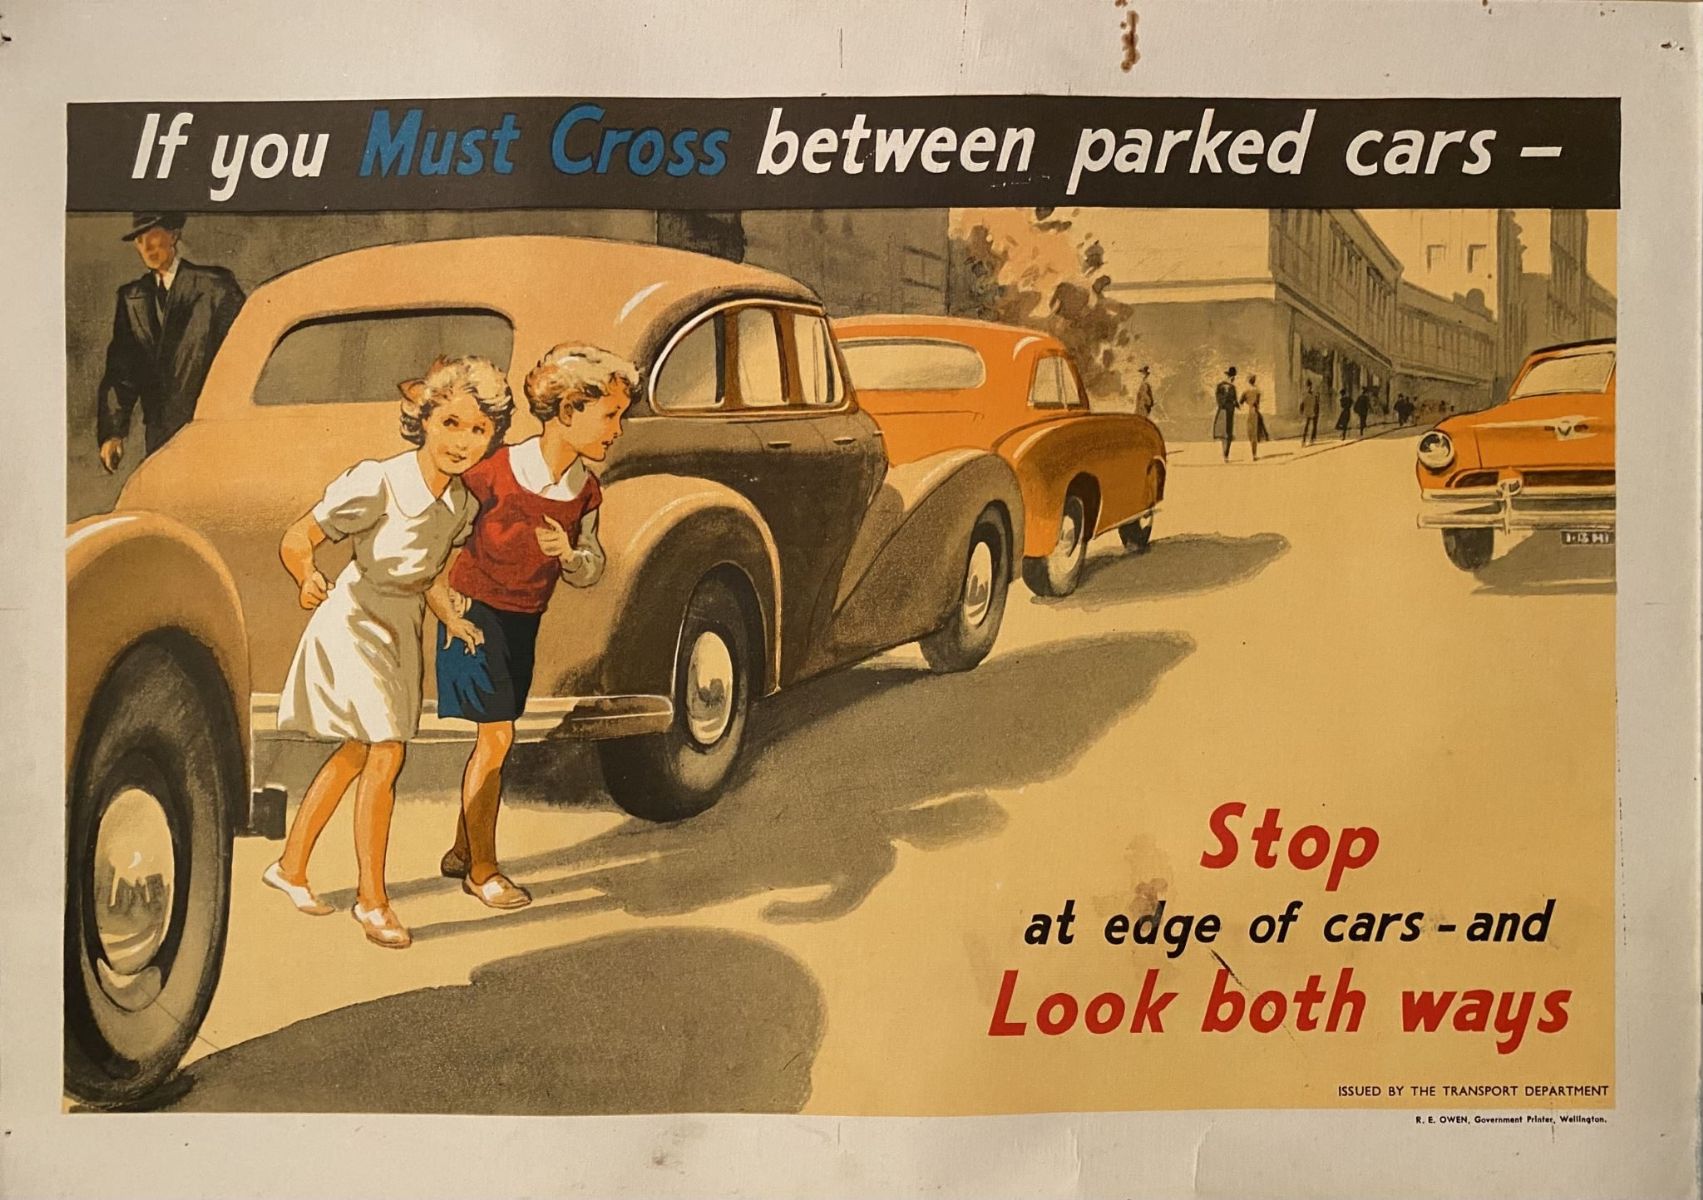 VINTAGE POSTER: If you Must Cross between parked cars - Look Both Ways